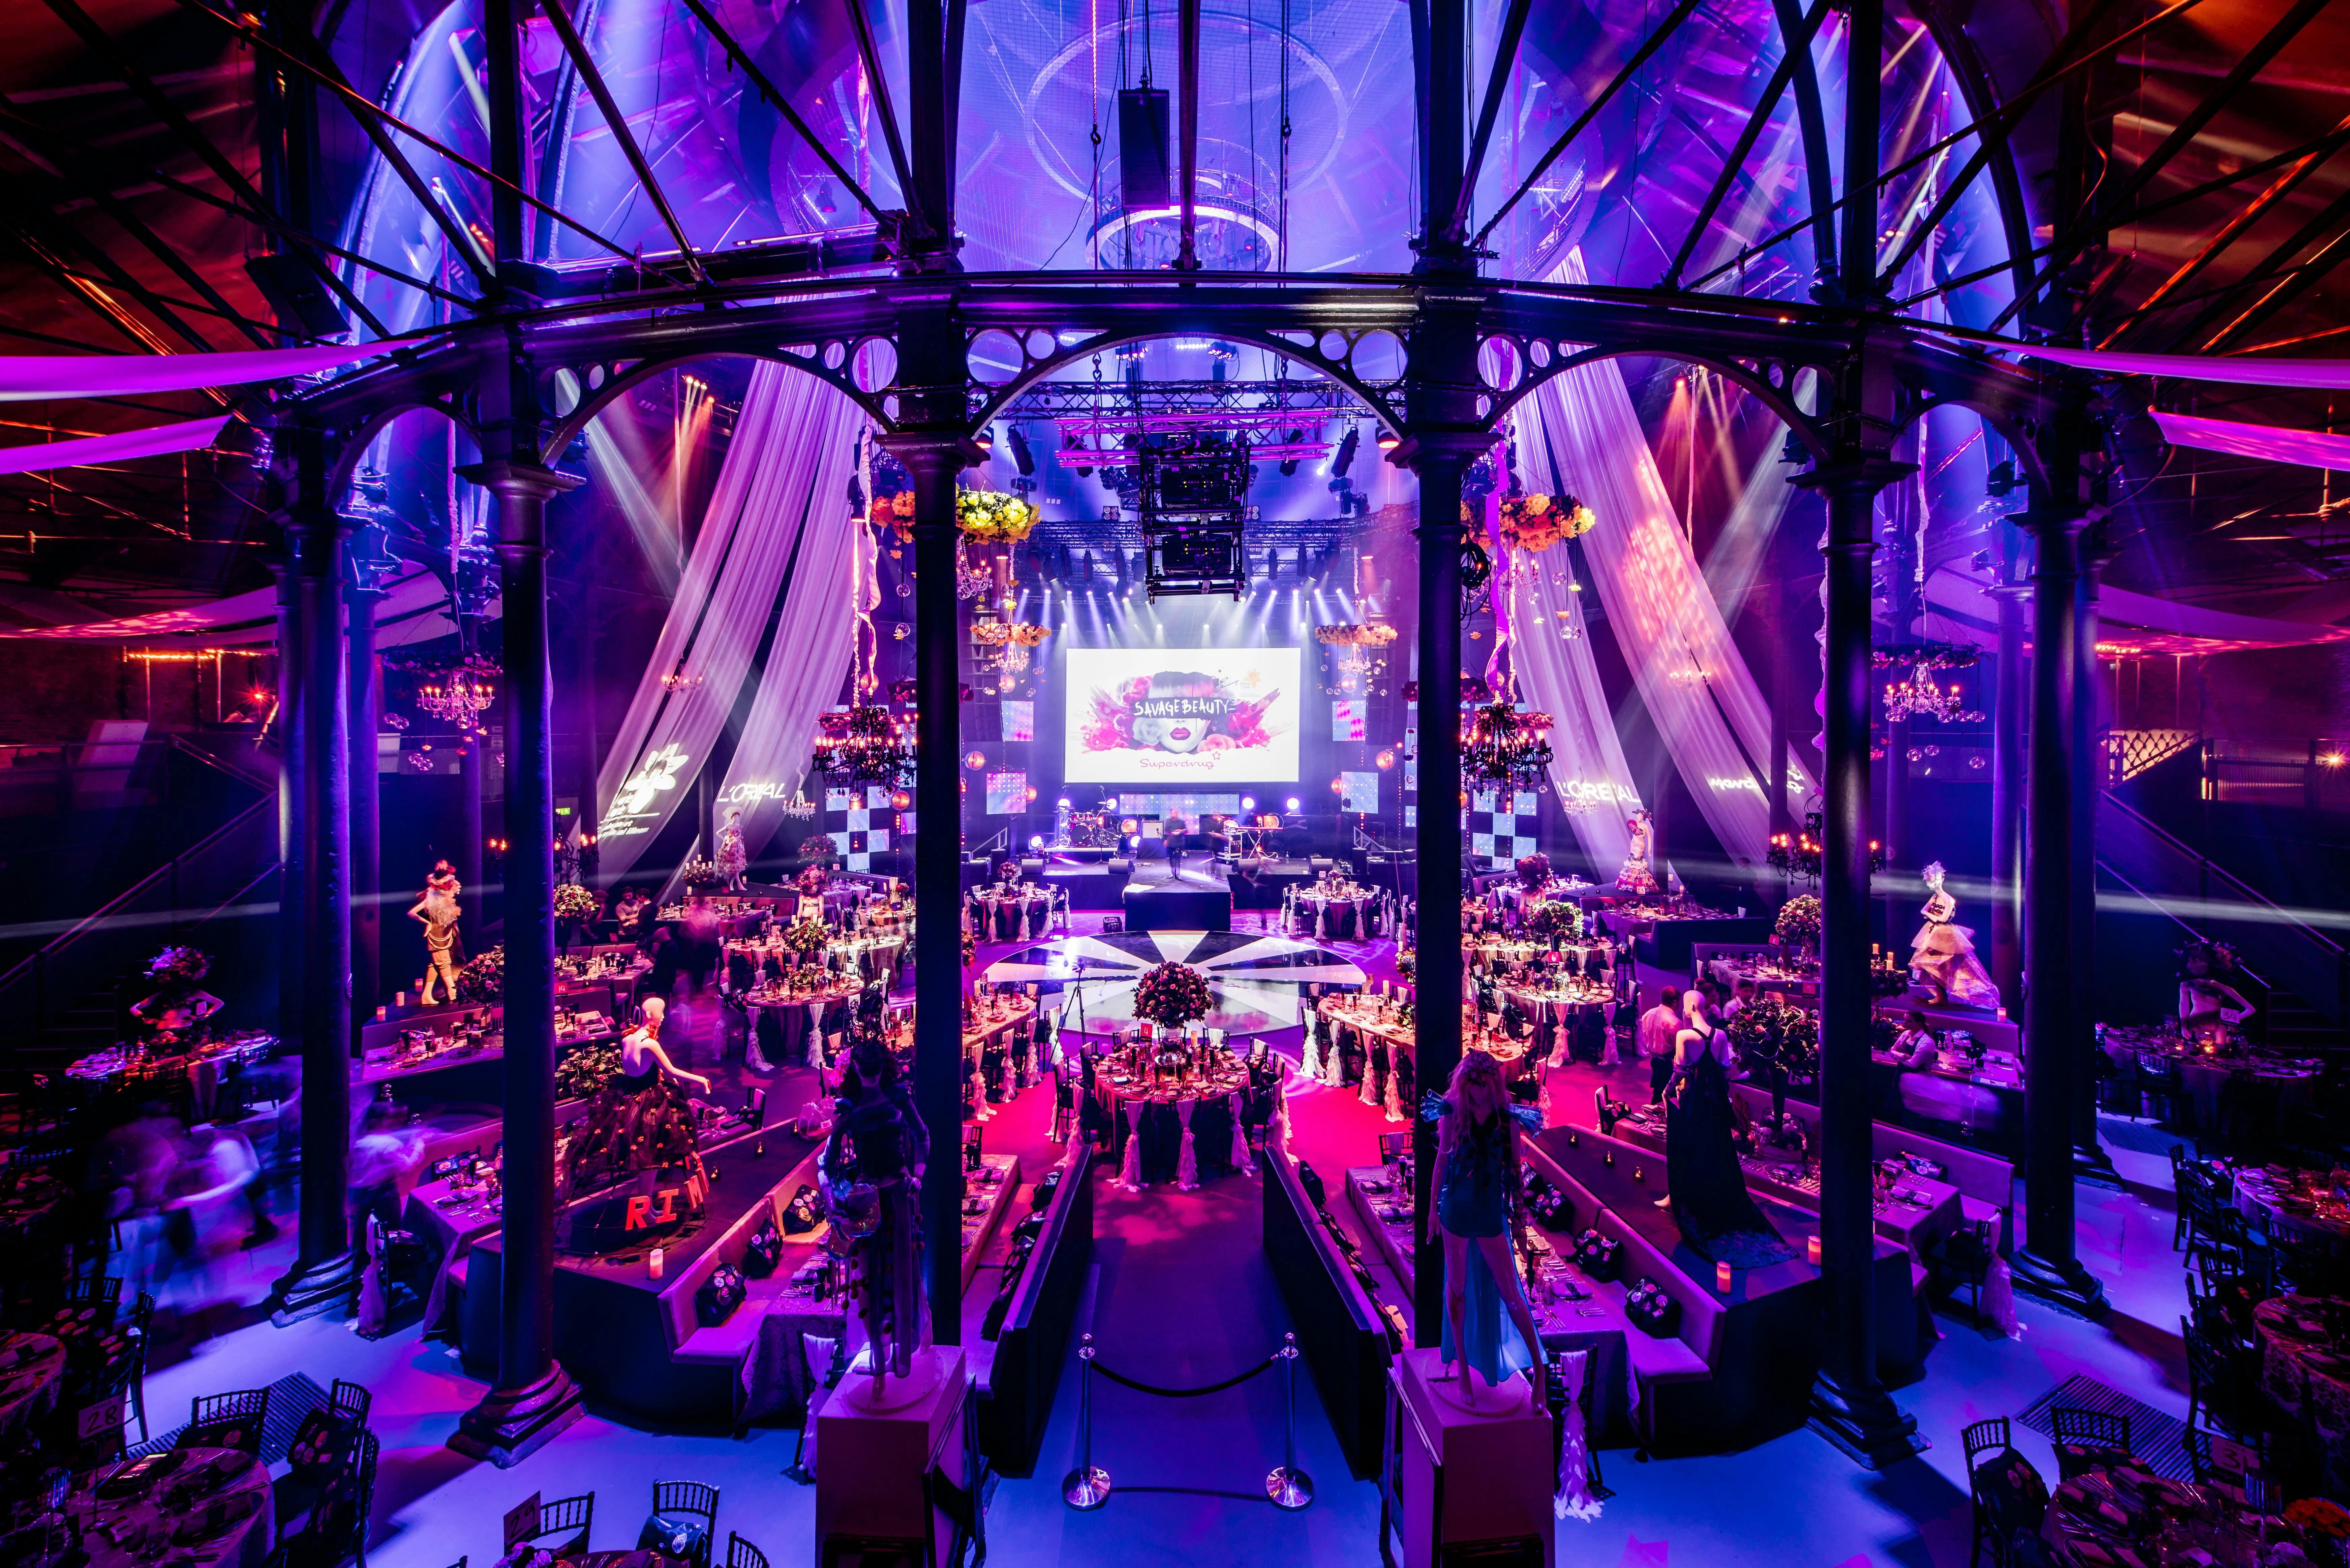 The Roundhouse gala dinners